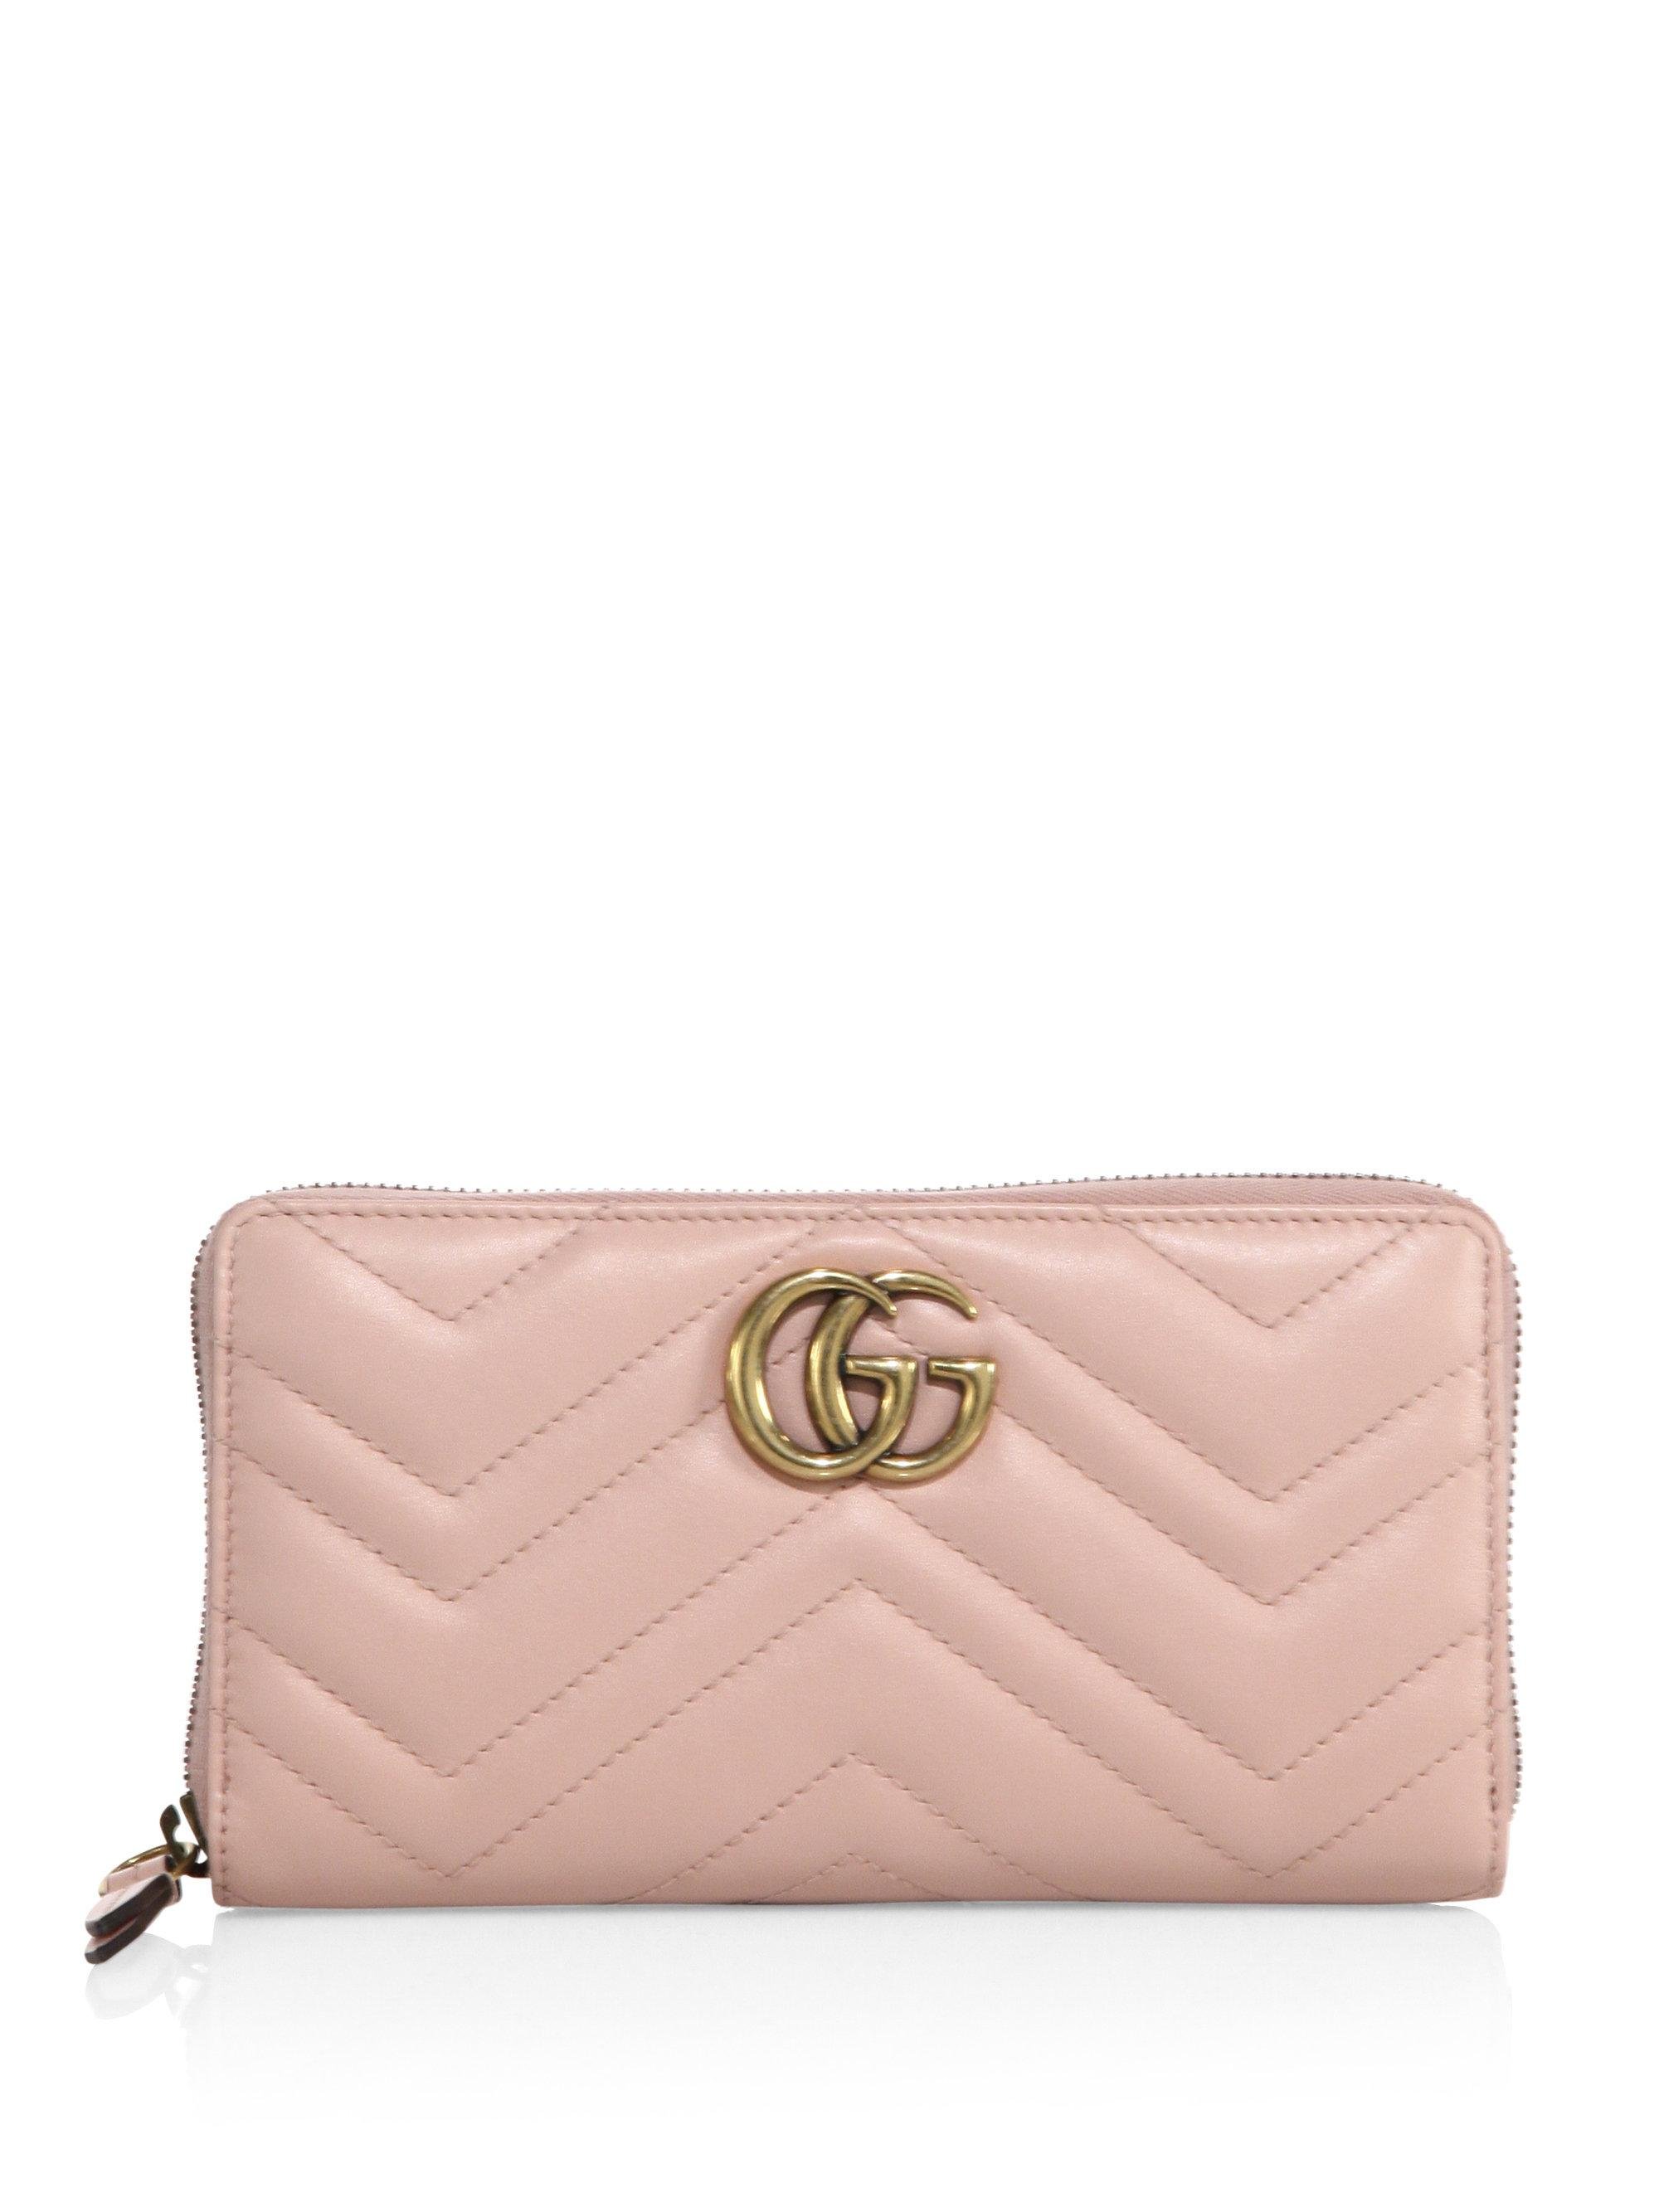 Gucci Gg Marmont Matelasse Leather Zip-around Wallet in Pink | Lyst